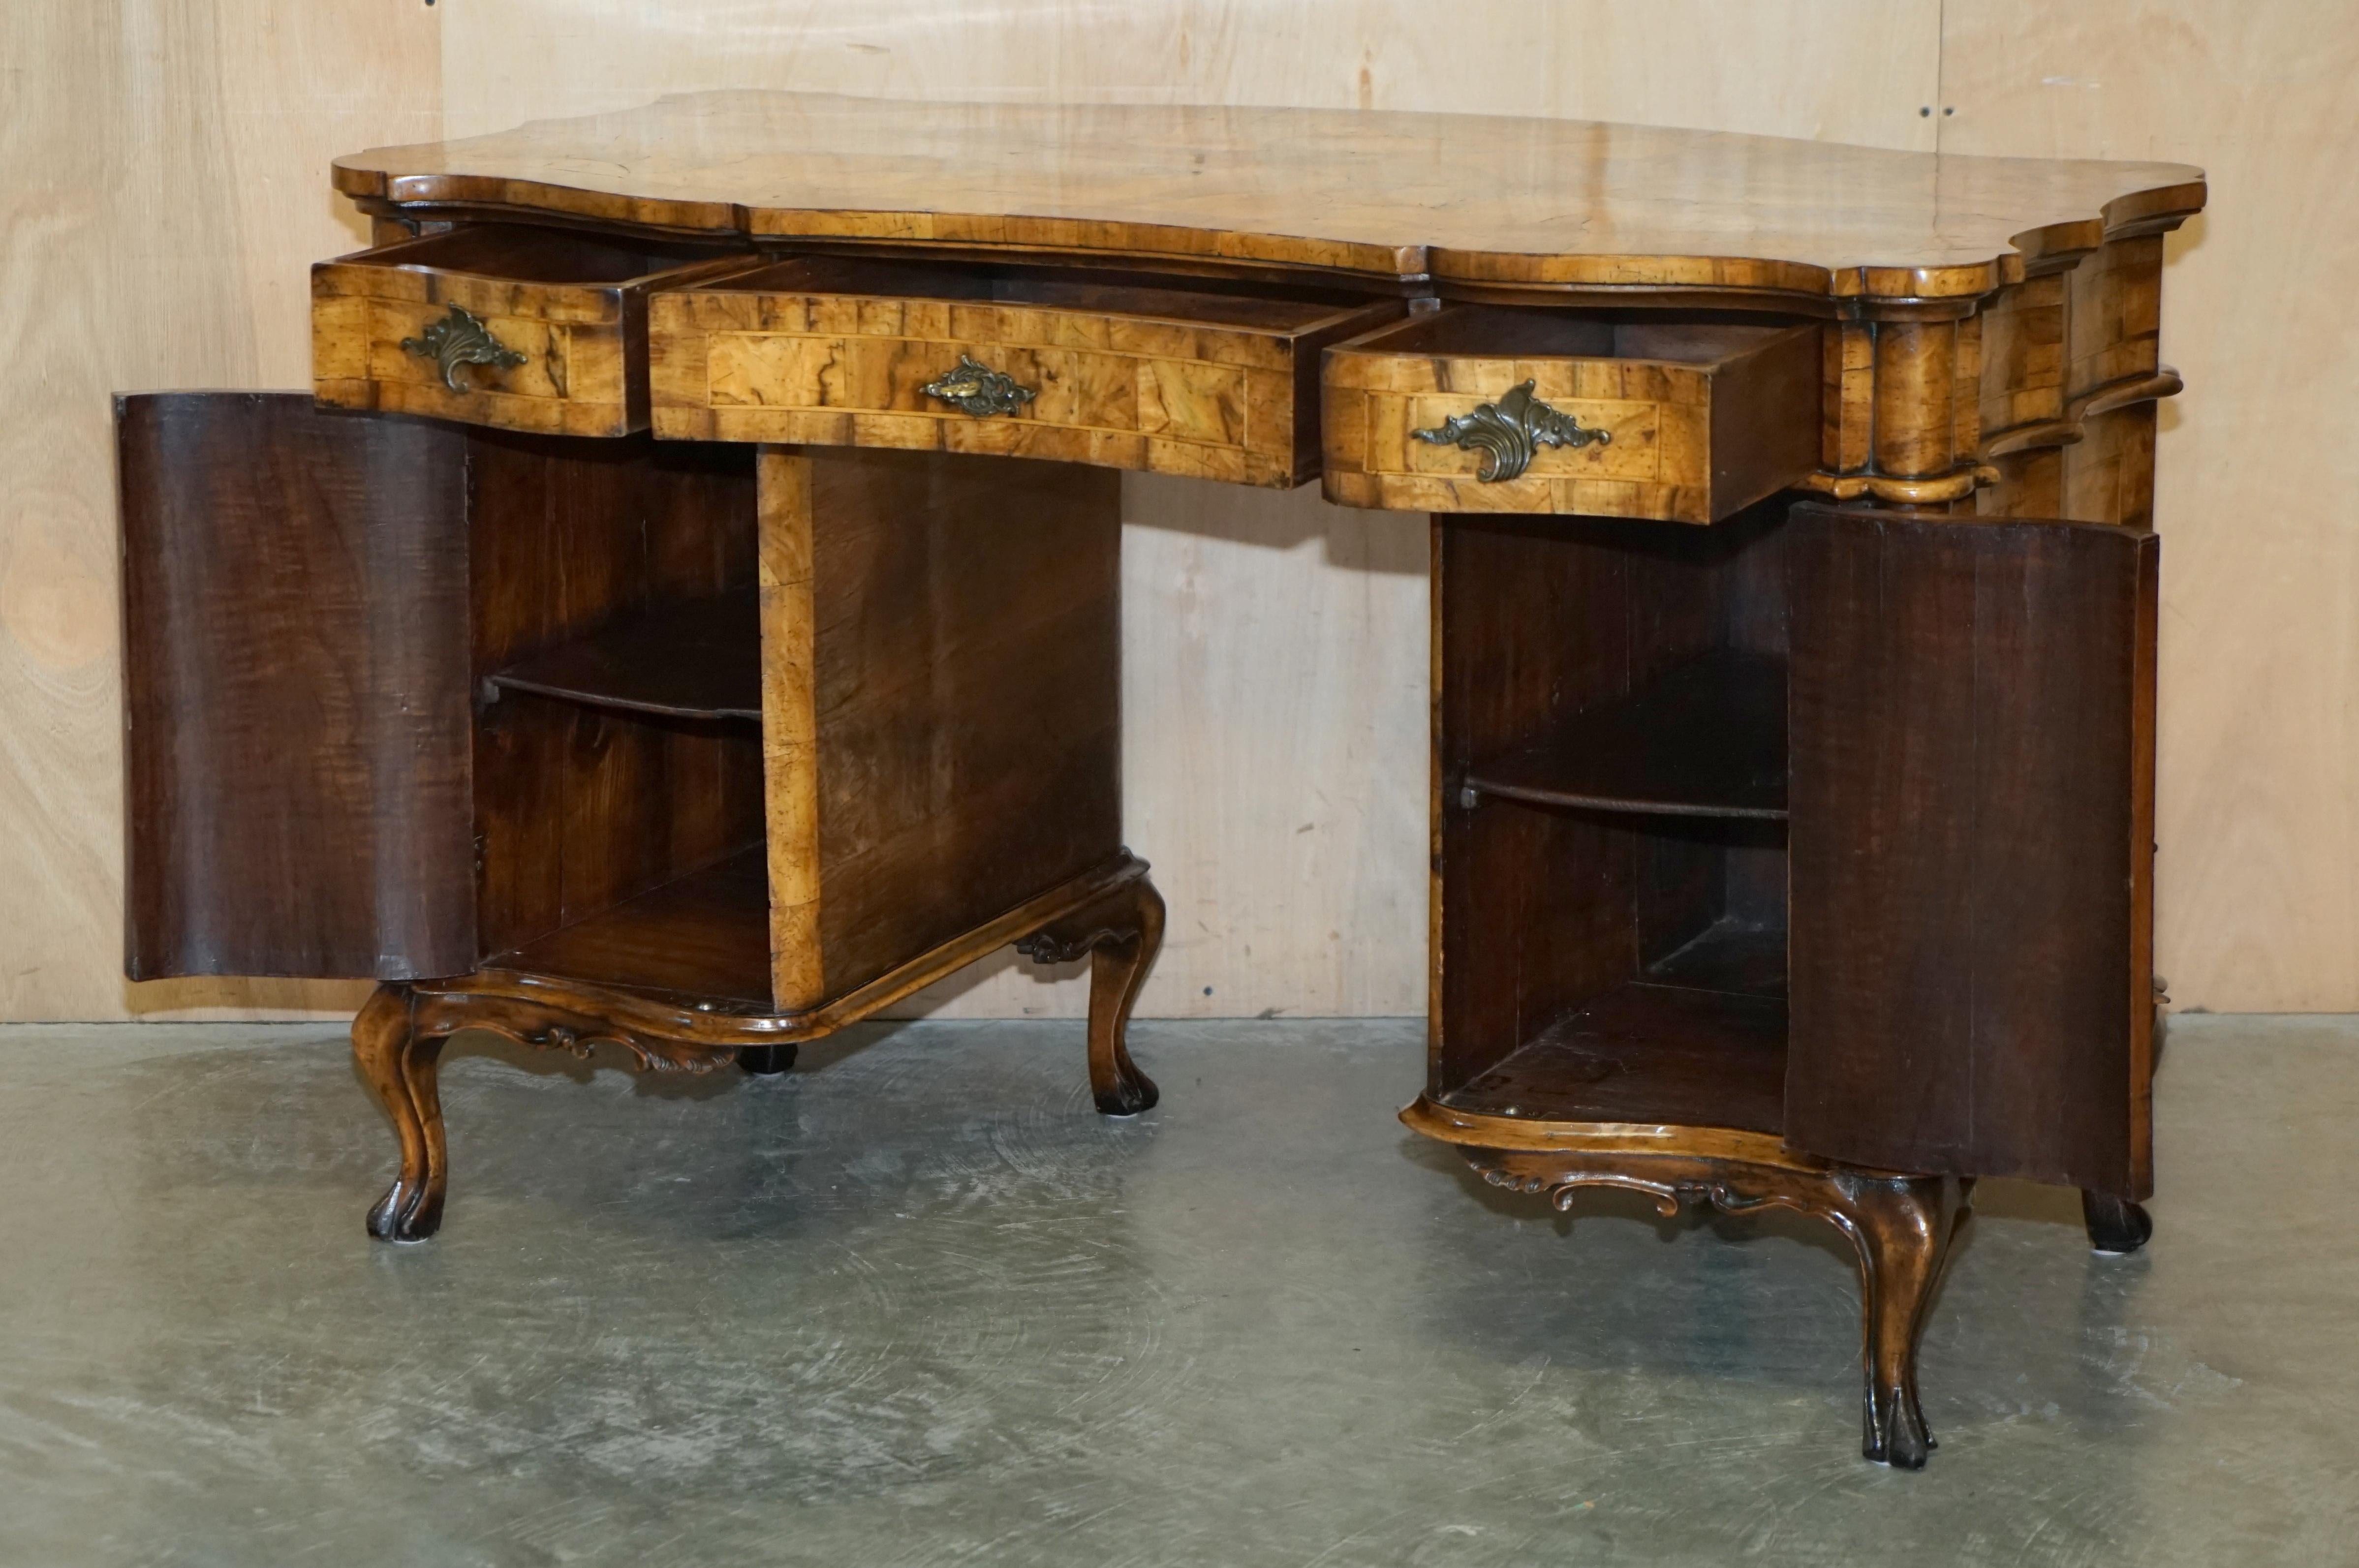 EXQUISITE ANTIQUE ITALIAN CIRCA 1860 OLIVE WOOD DESK WRITING TABLE SUBLiME WOOD For Sale 10